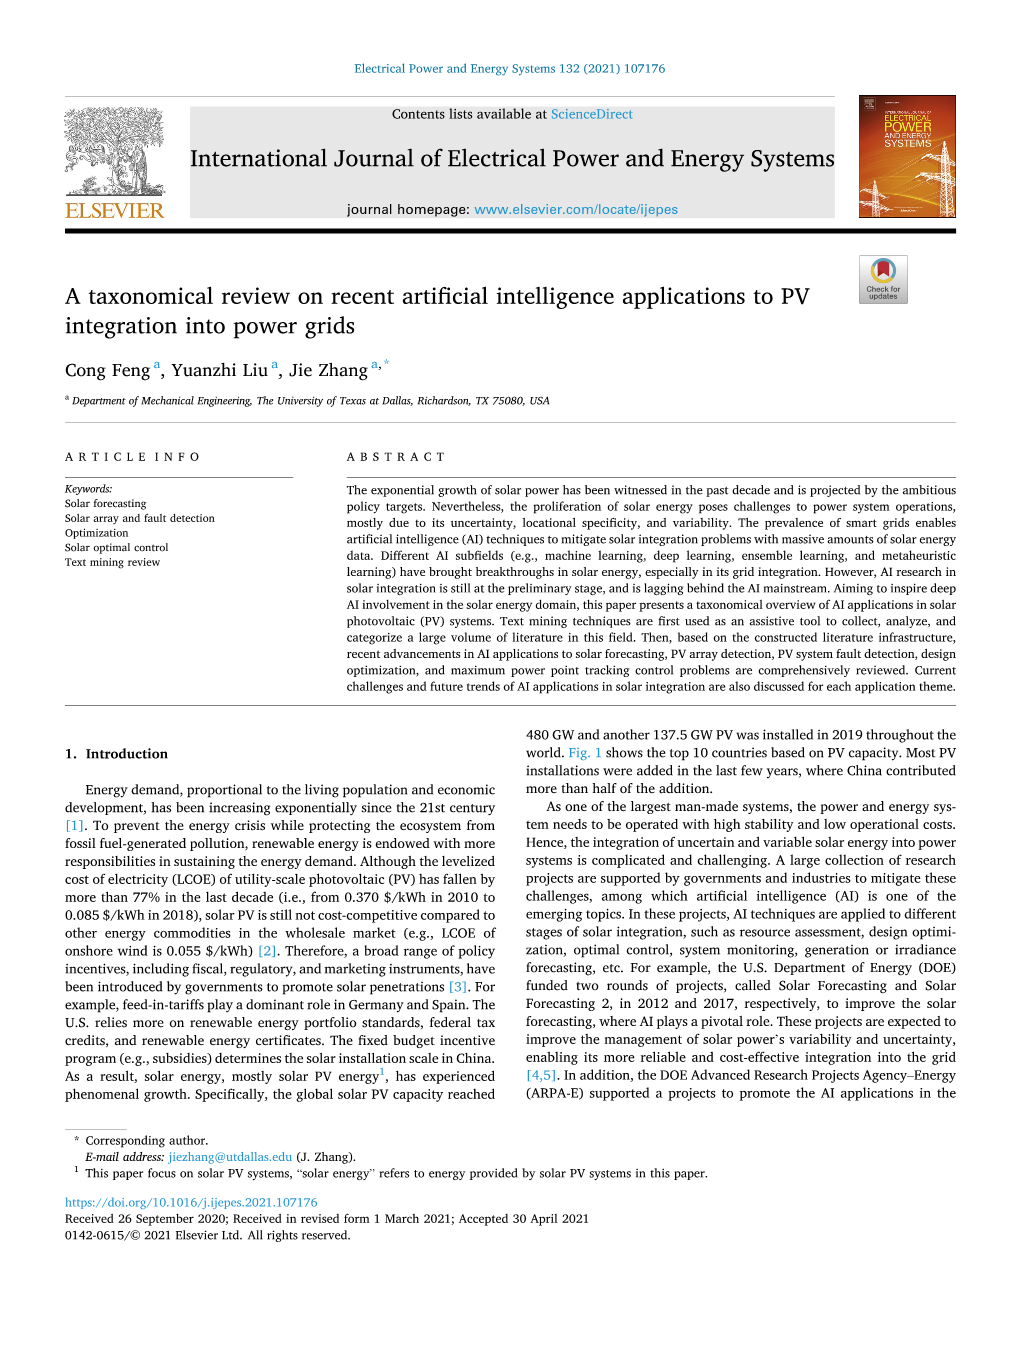 A Taxonomical Review on Recent Artificial Intelligence Applications to PV Integration Into Power Grids